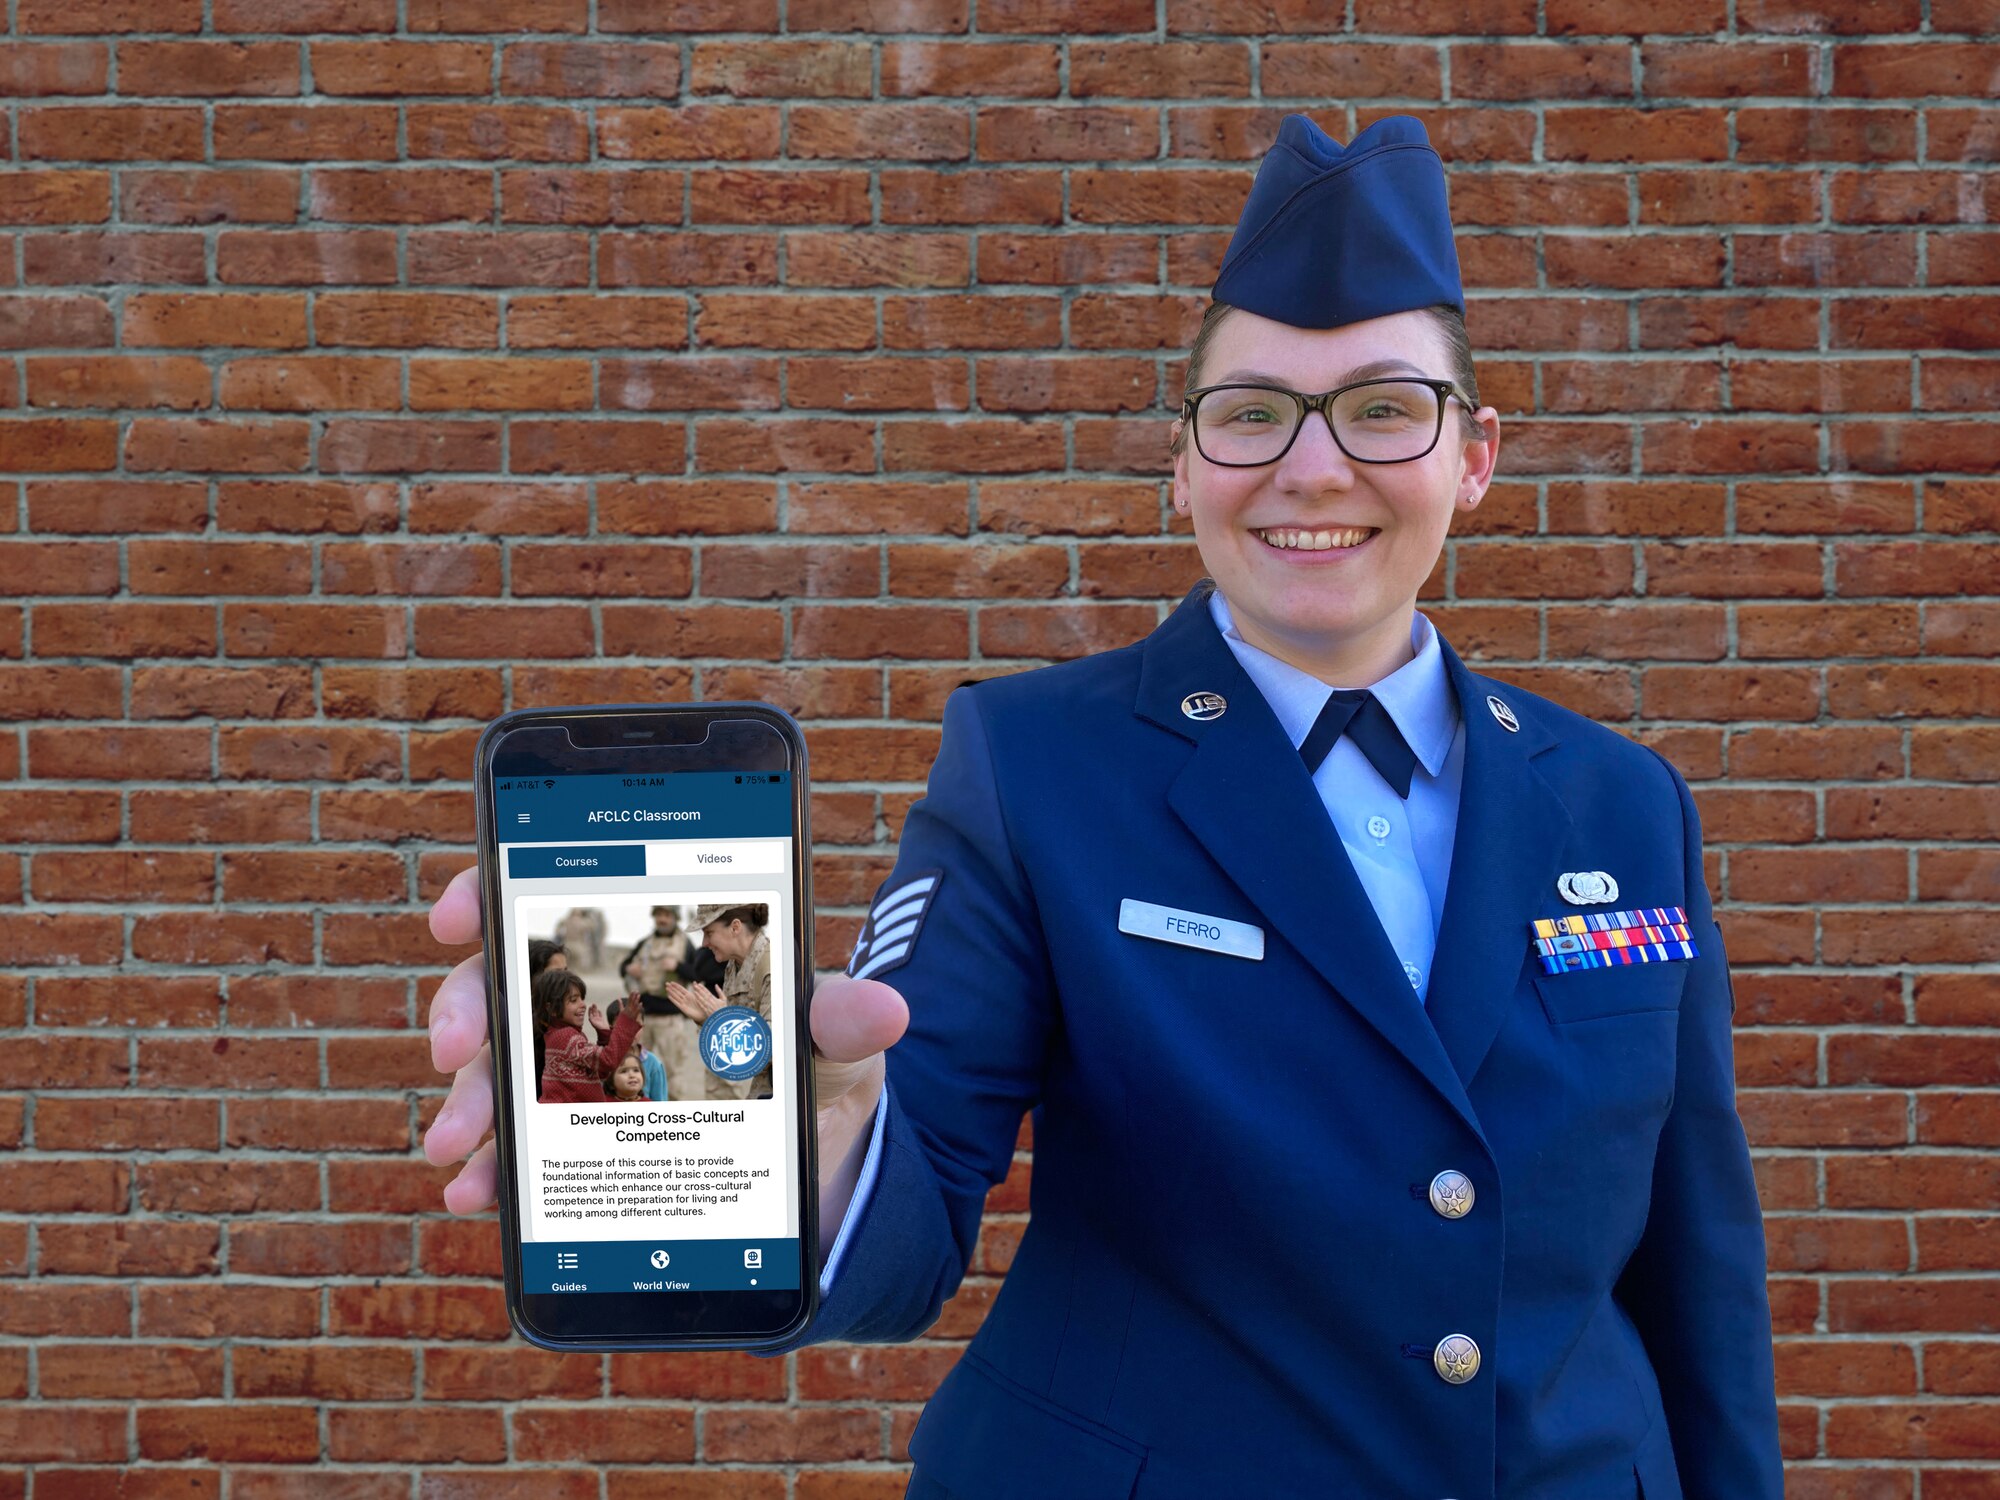 Airman standing in front of a brick wall showing Culture Guide app course on phone